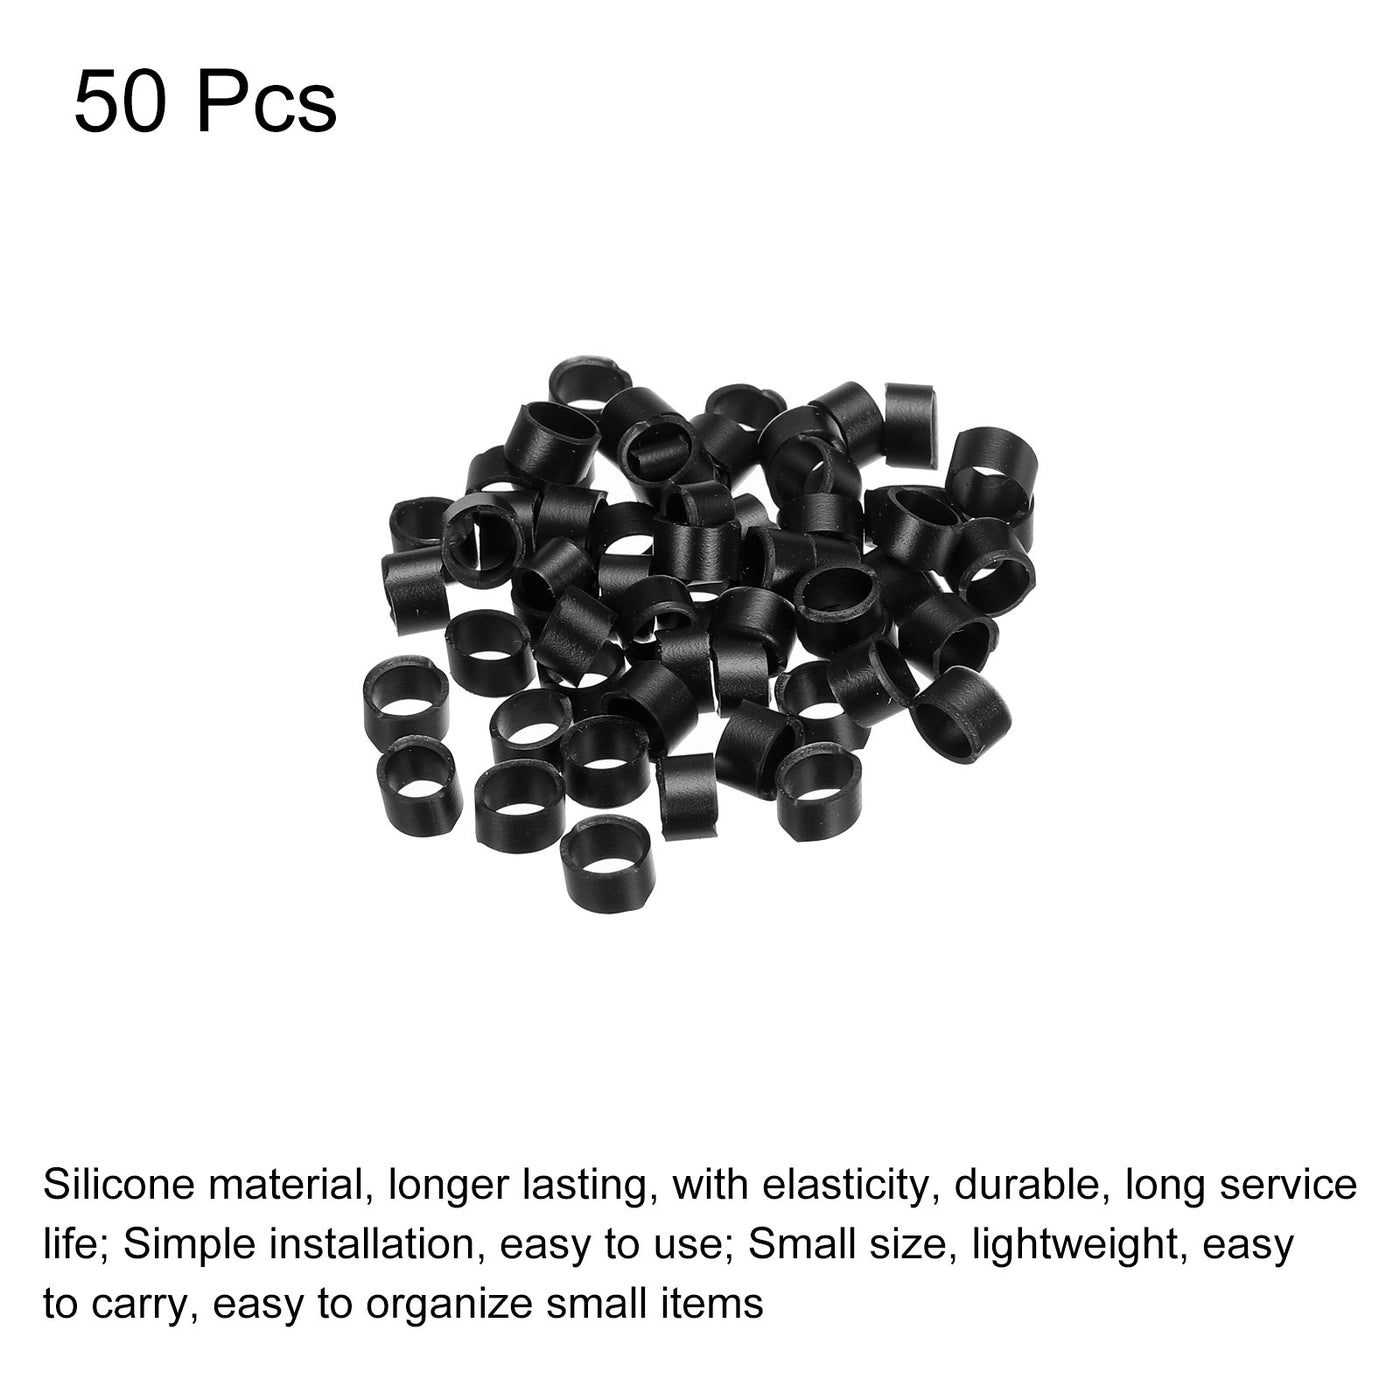 Harfington Silicone Rubber Bands Rings 50pcs Non-slip 3/8" Flat Black for Books, Art, Boxes, Cord Wrapping, Bag Wraps